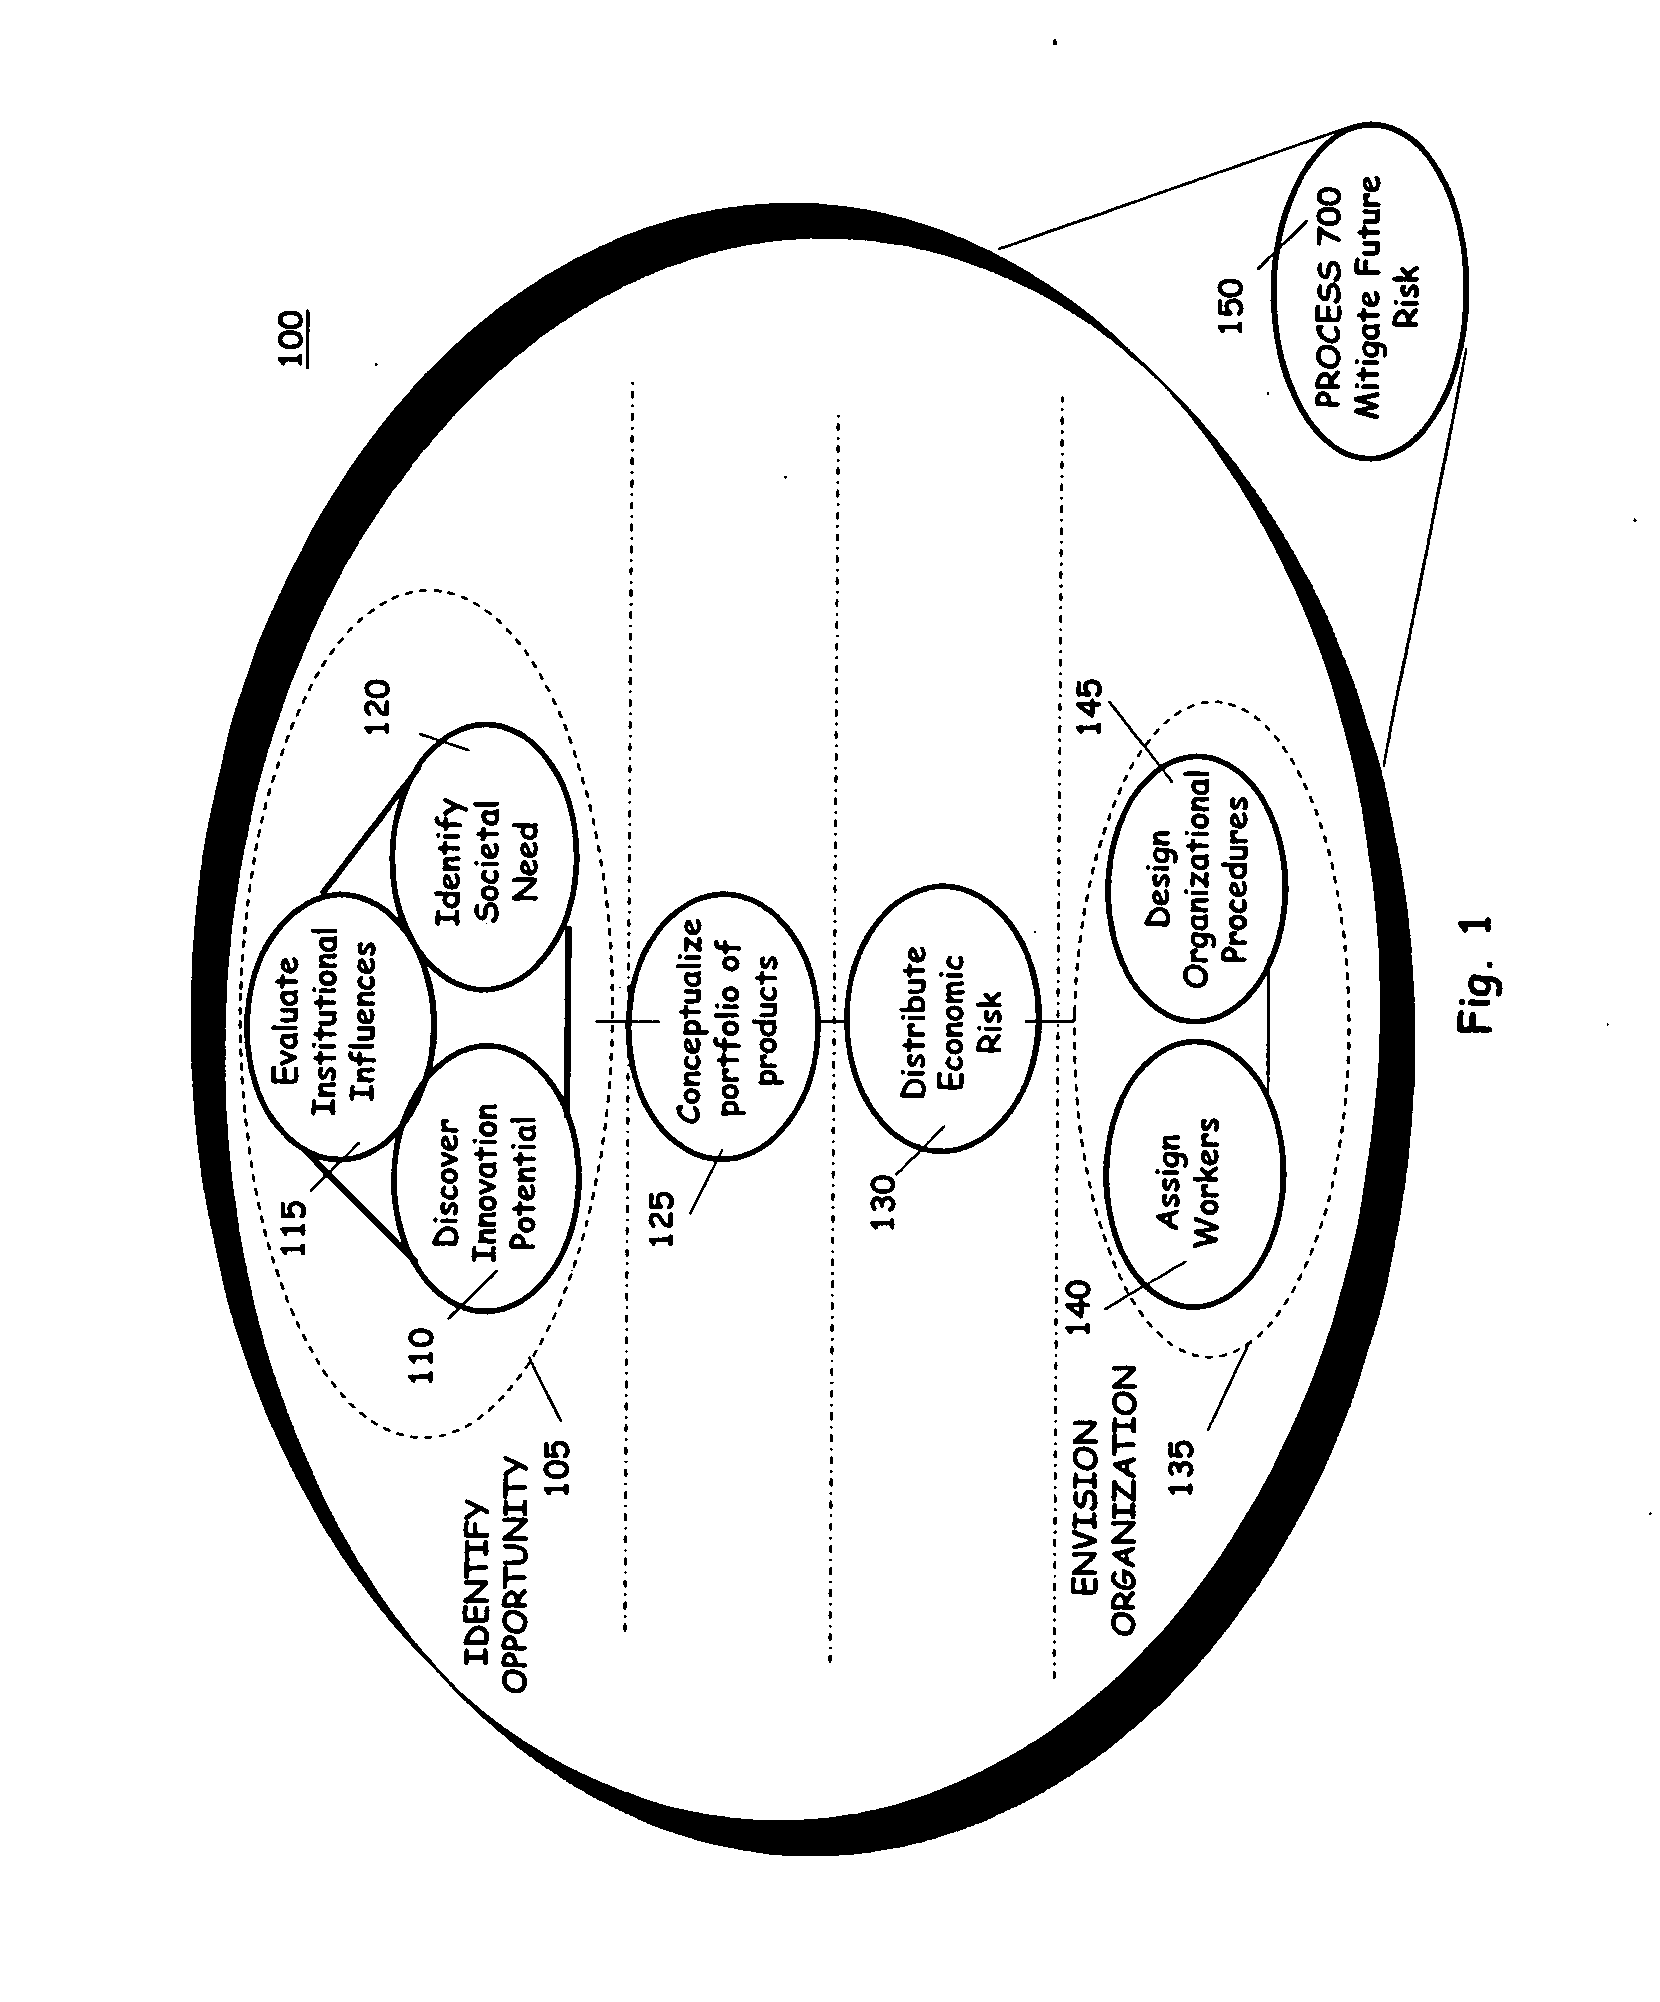 System and method for generating and evaluating an innovation